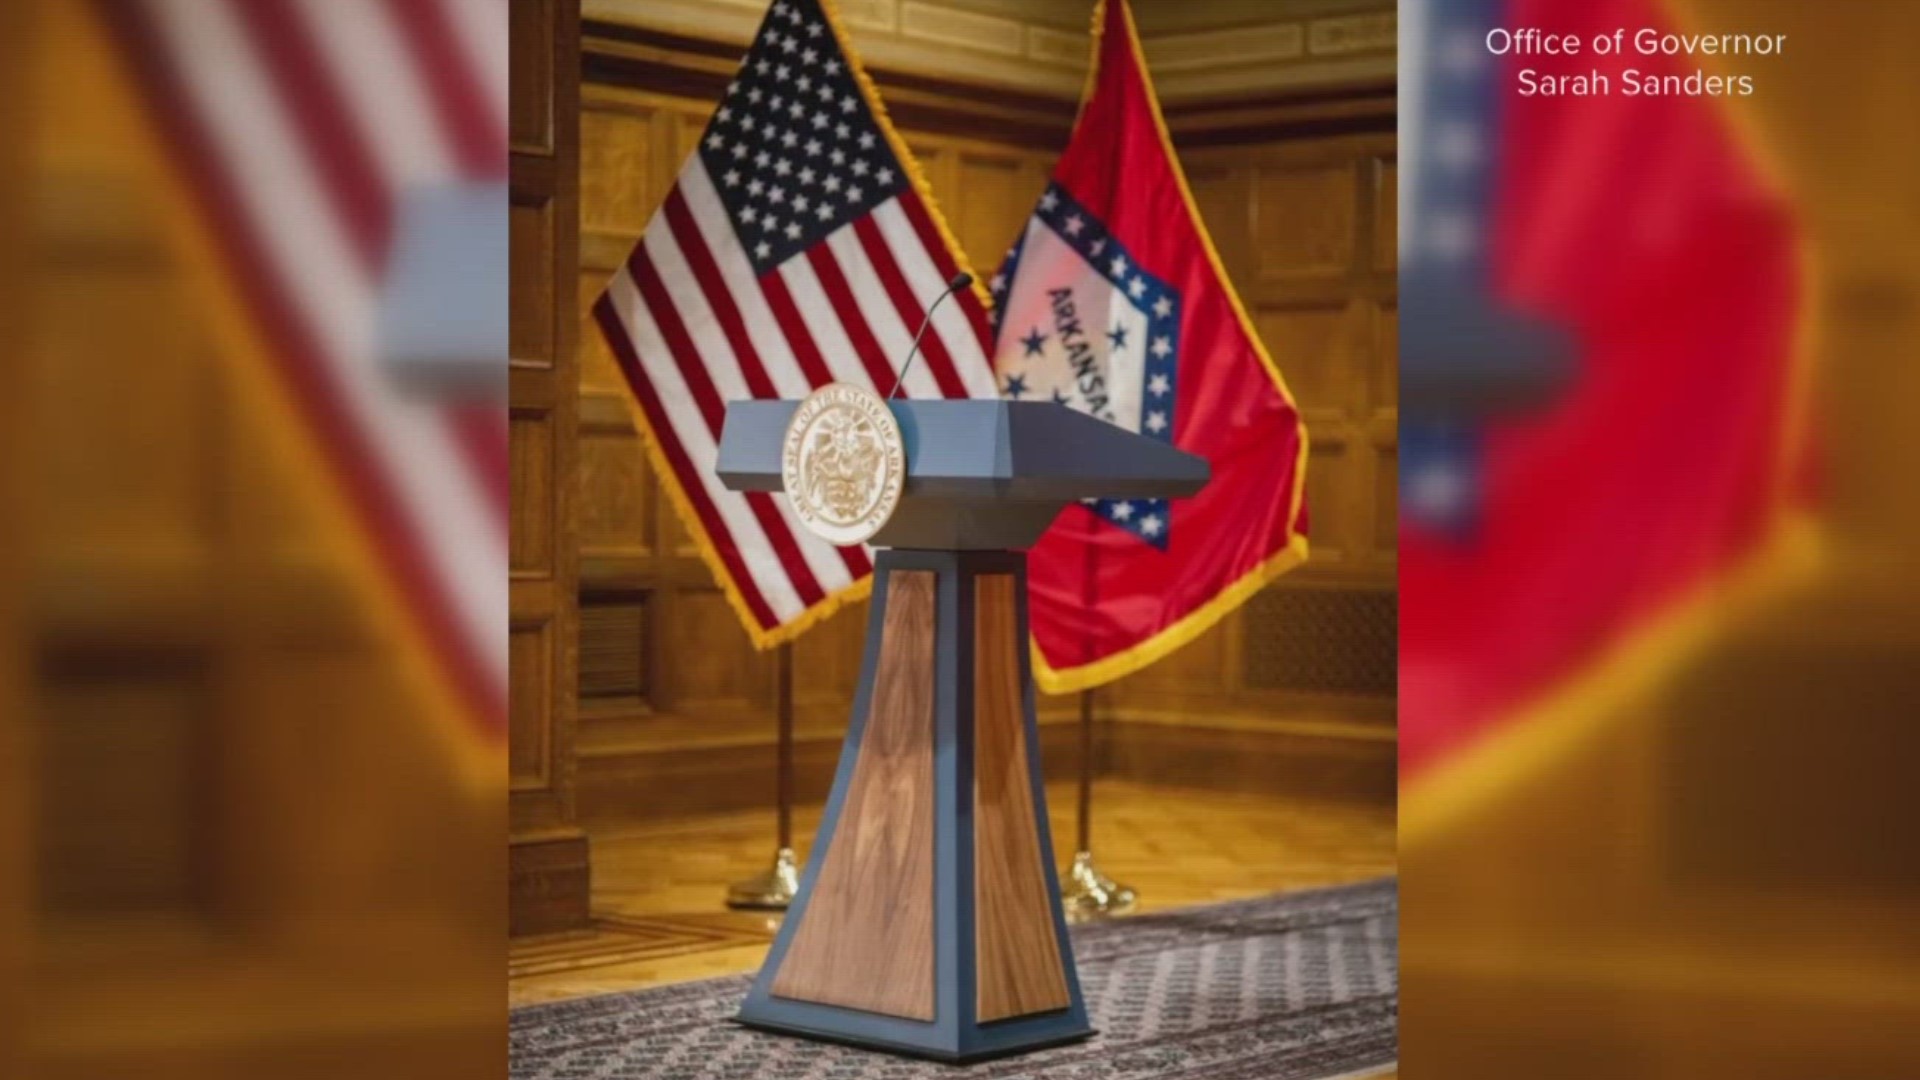 Gov. Sanders’ office has not said what features contributed to the lectern’s seemingly high cost. The price also included taxes, shipping, and a 3% credit card fee.